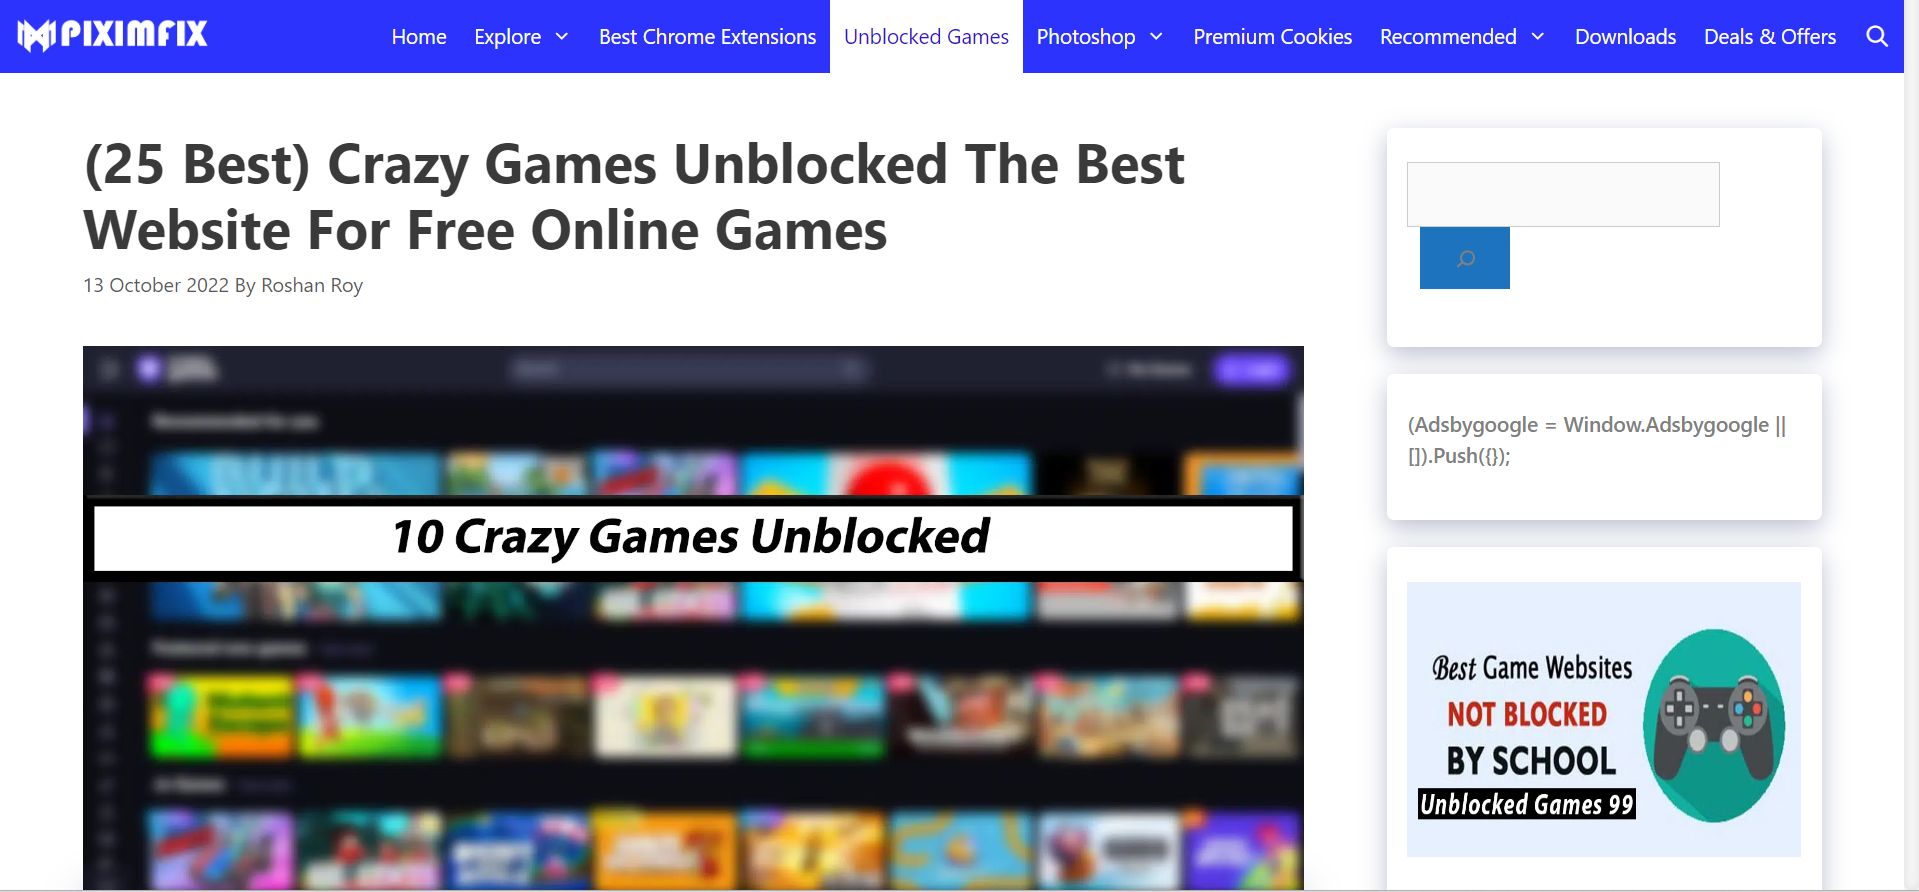 Unblocked Games WTF - Enjoy Limitless Gaming Access Without Restrictions!